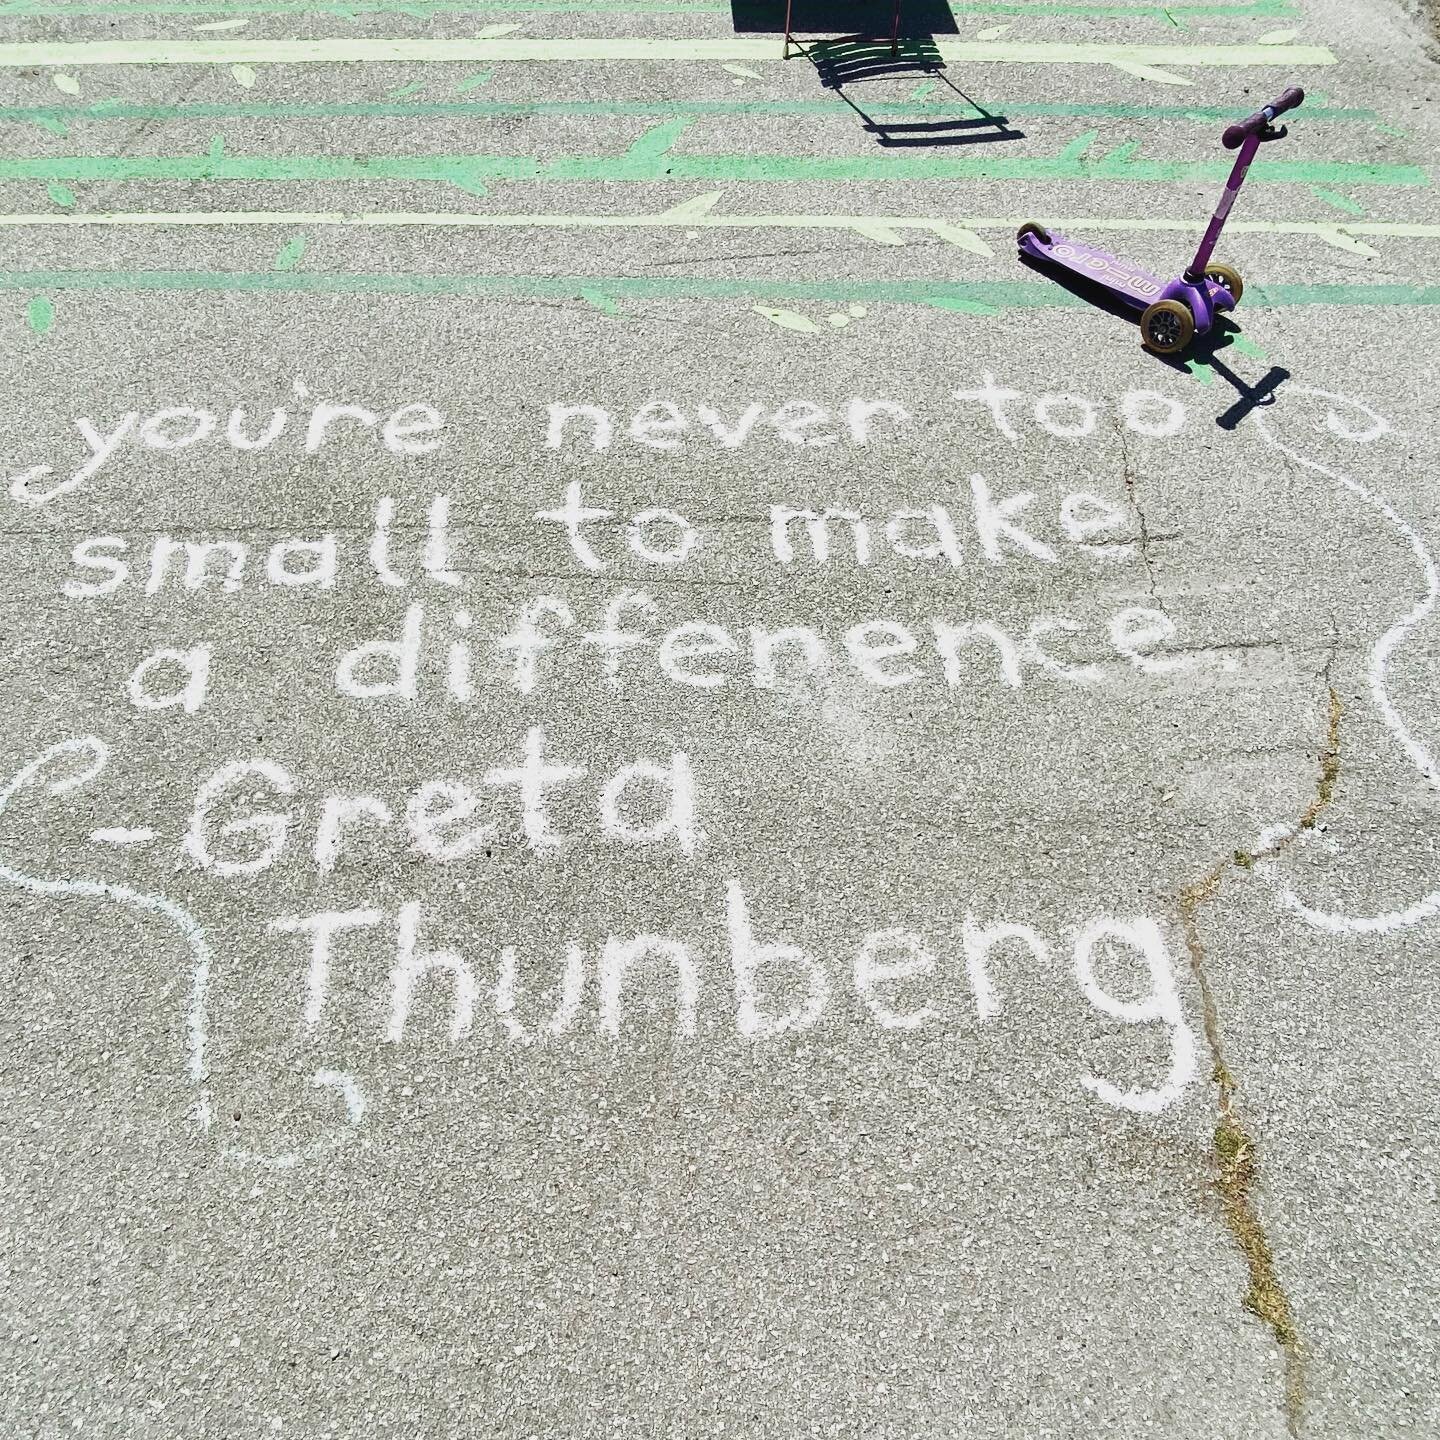 &ldquo;You&rsquo;re never too small to make a difference.&rdquo; 

Sometimes the world feels too big, too fast, and too grand to make a ripple. 

Thank you to @cheerfulcascade for sprinkling joy and hope in the neighborhood. ❤️